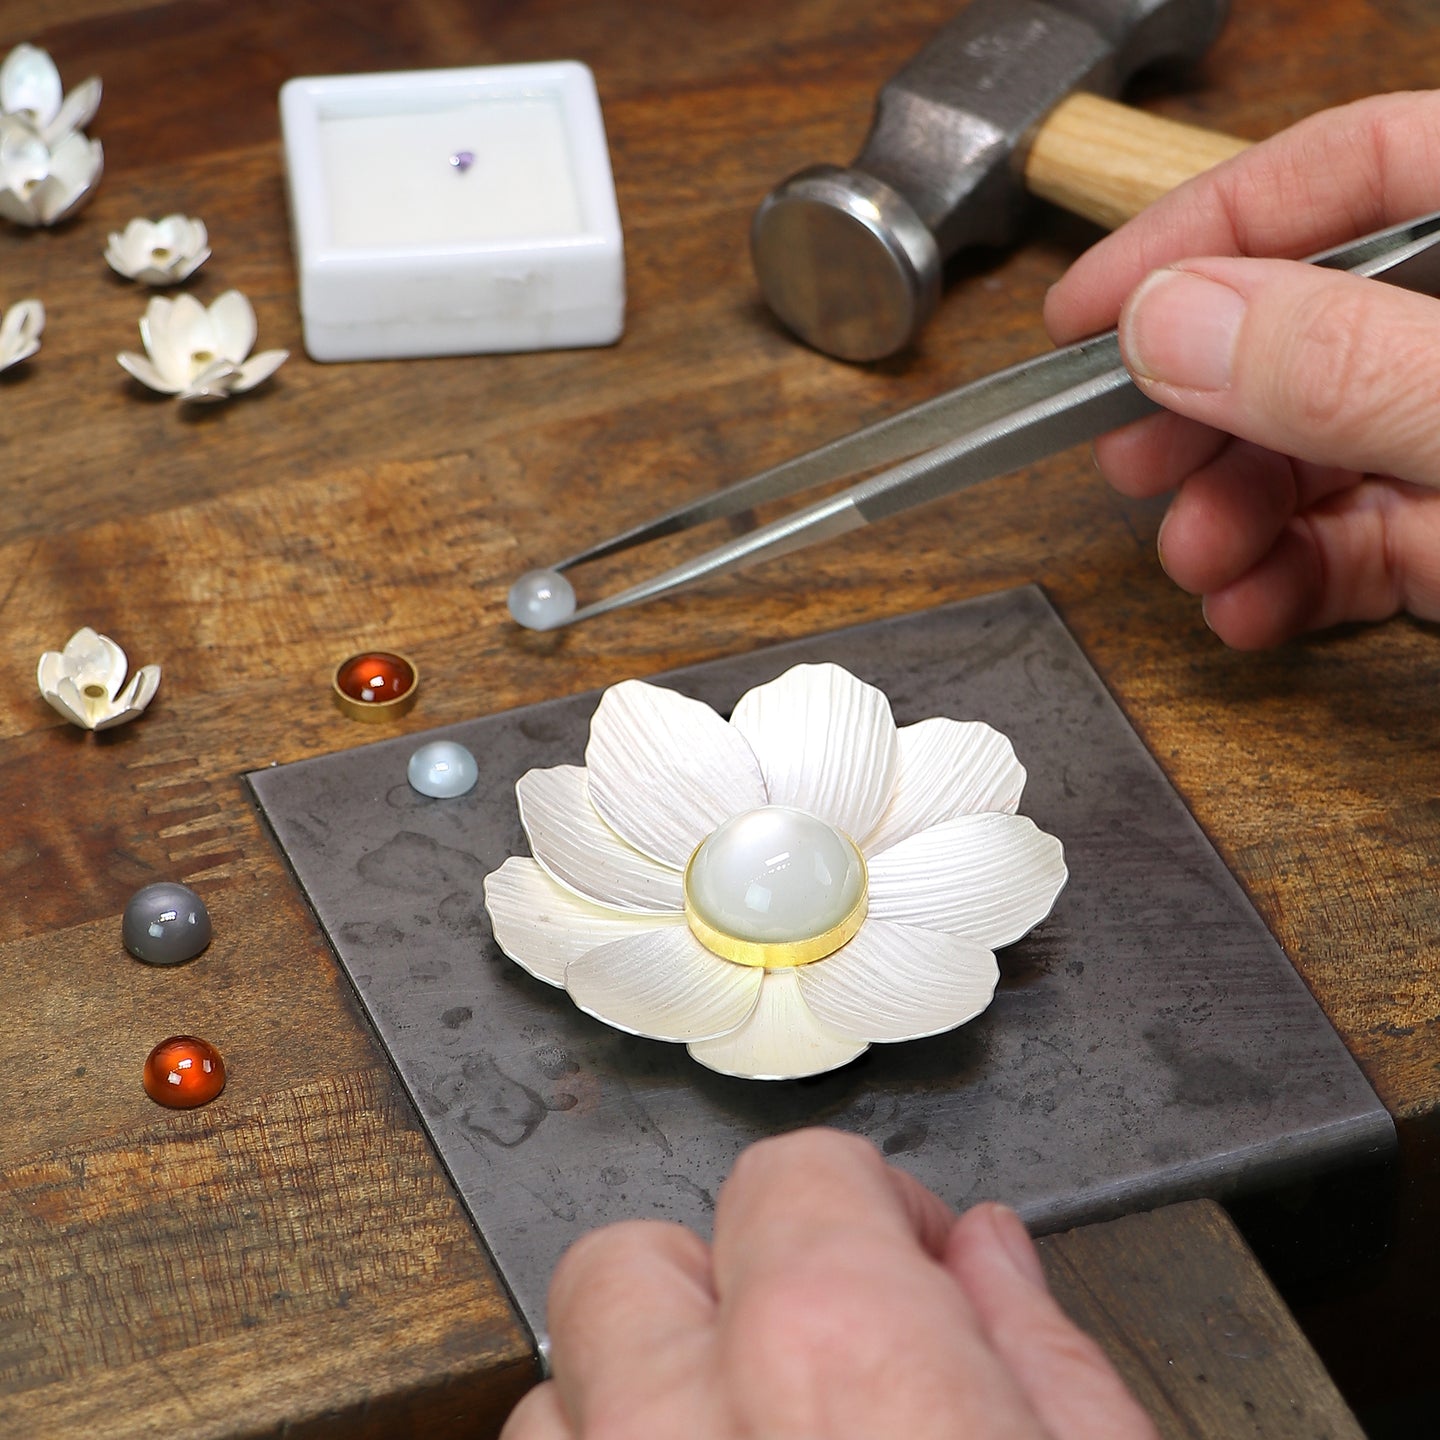 Handmaking custom jewelry with tools at the jeweler's bench